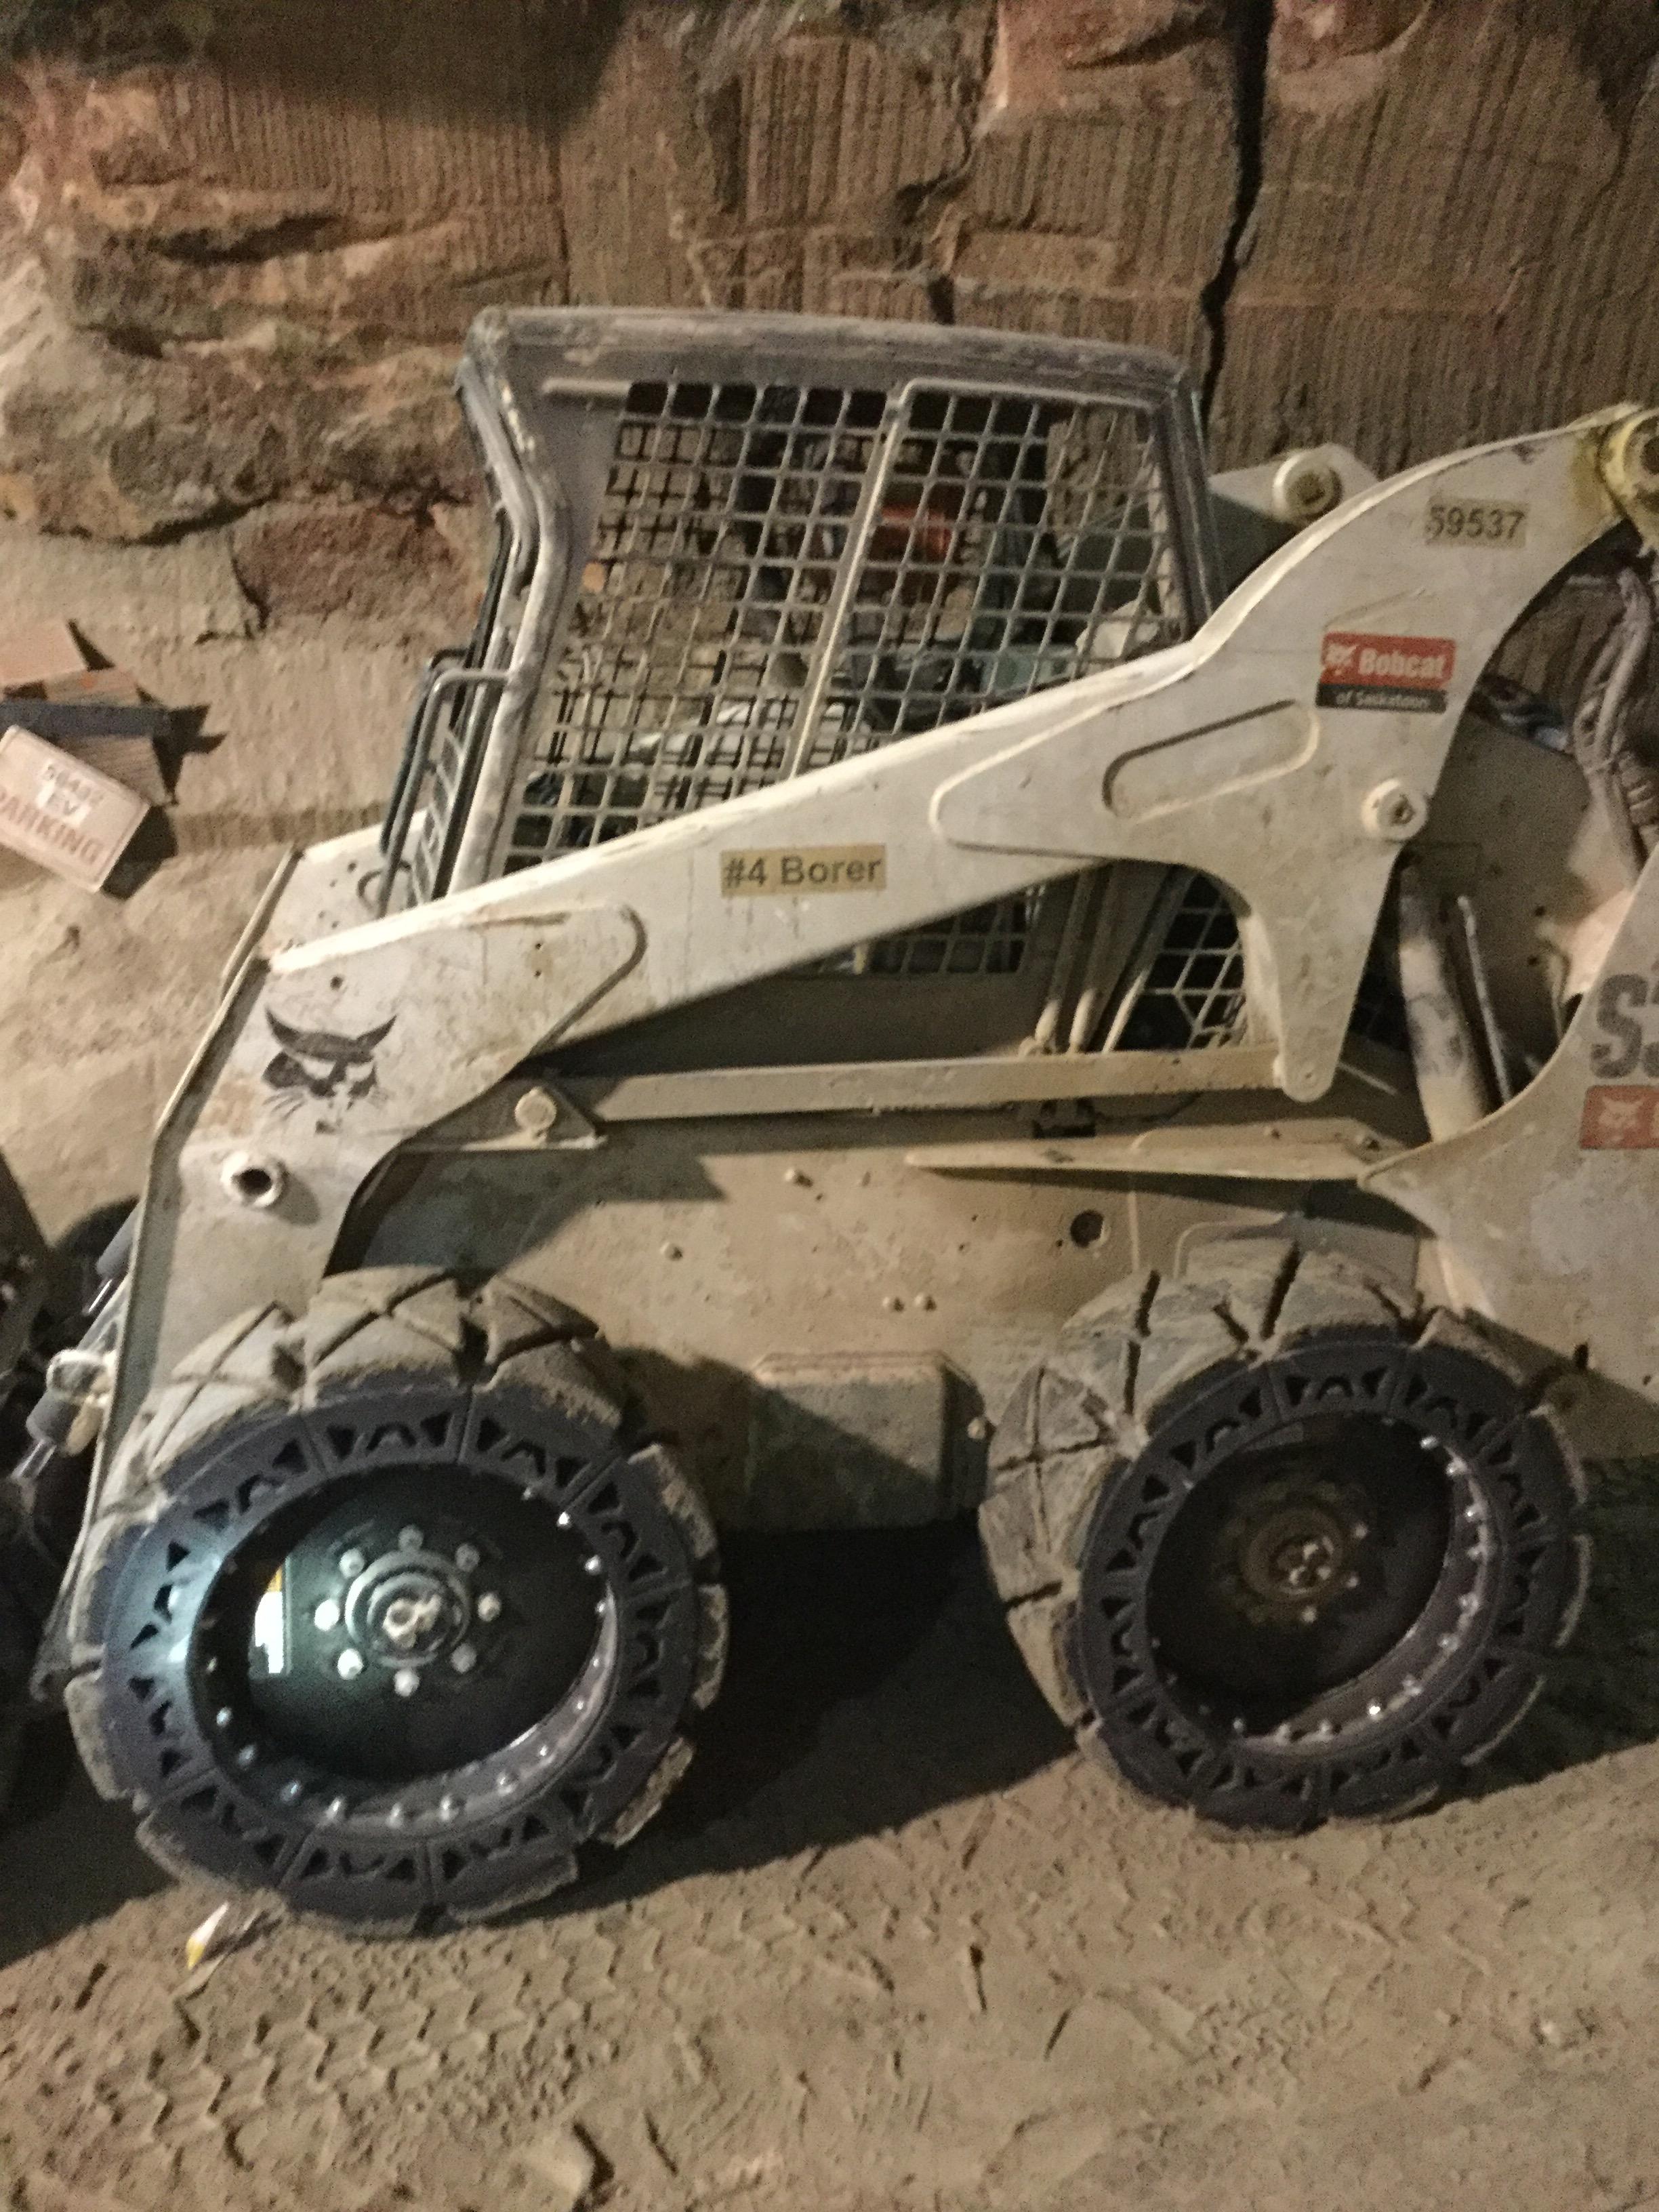 This image shows a white Bobcat skid steer with our EWRS-HS tires on a jobsite.